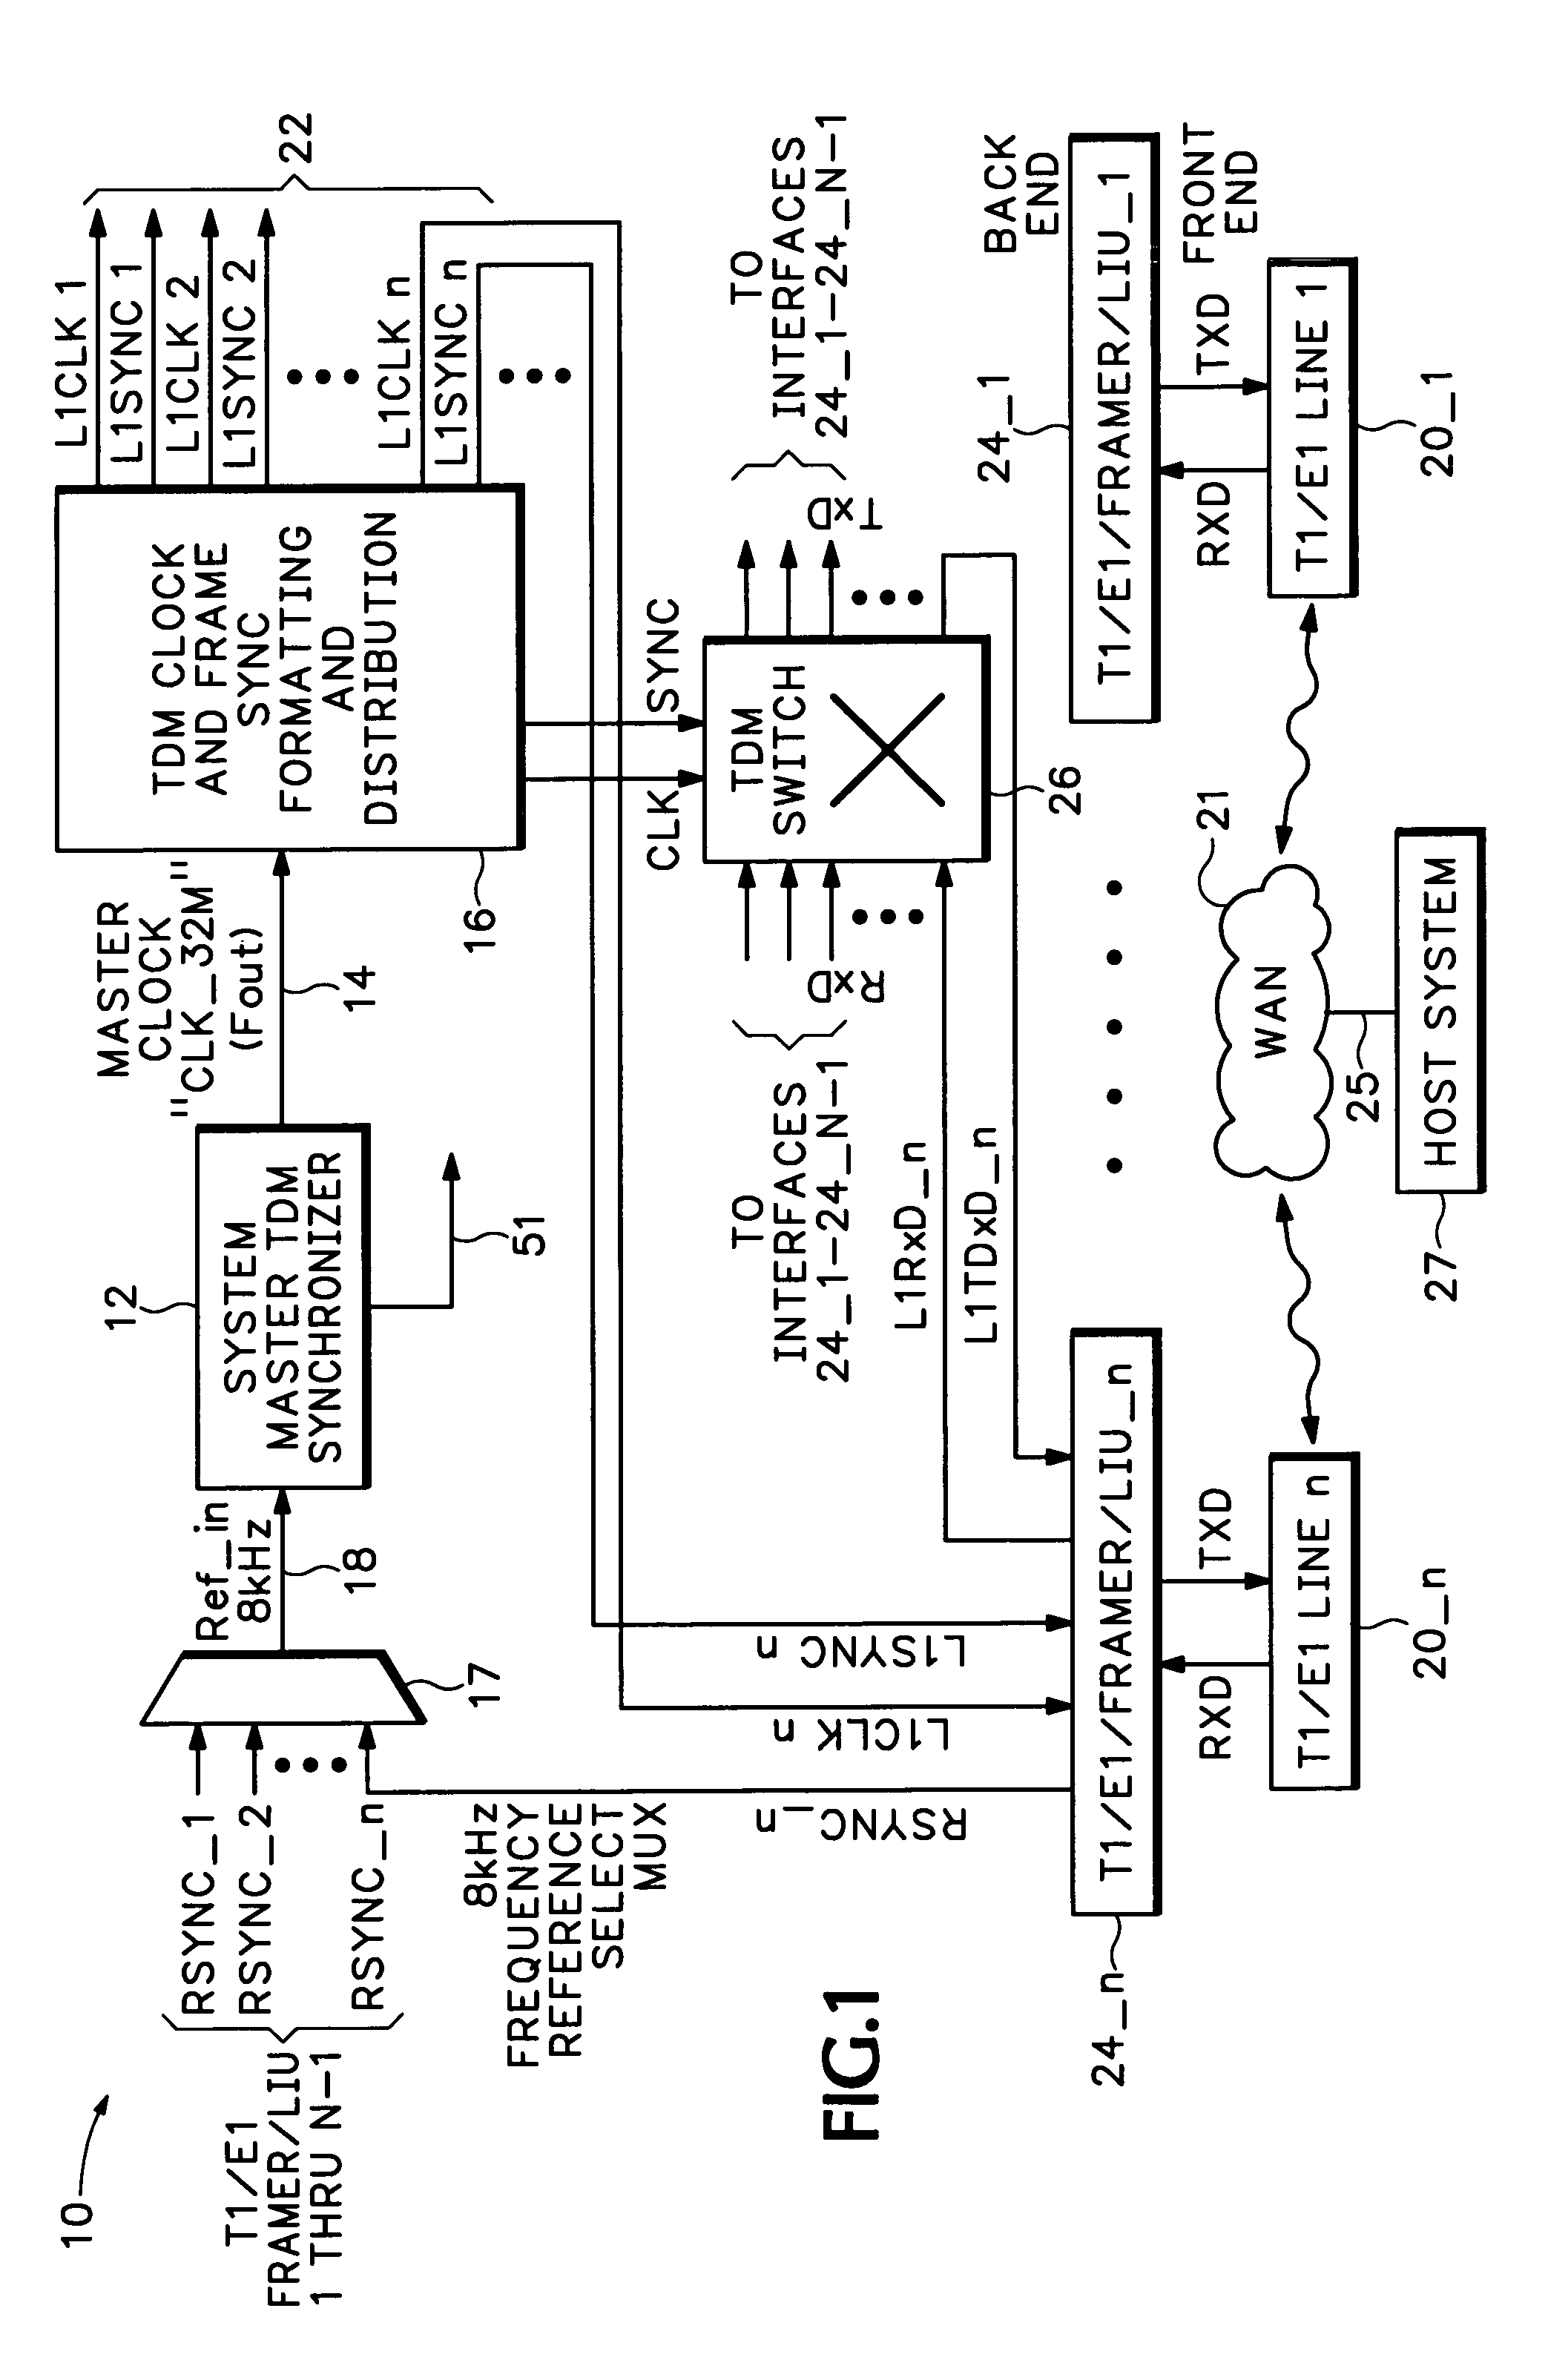 Method and apparatus for testing synchronization circuitry